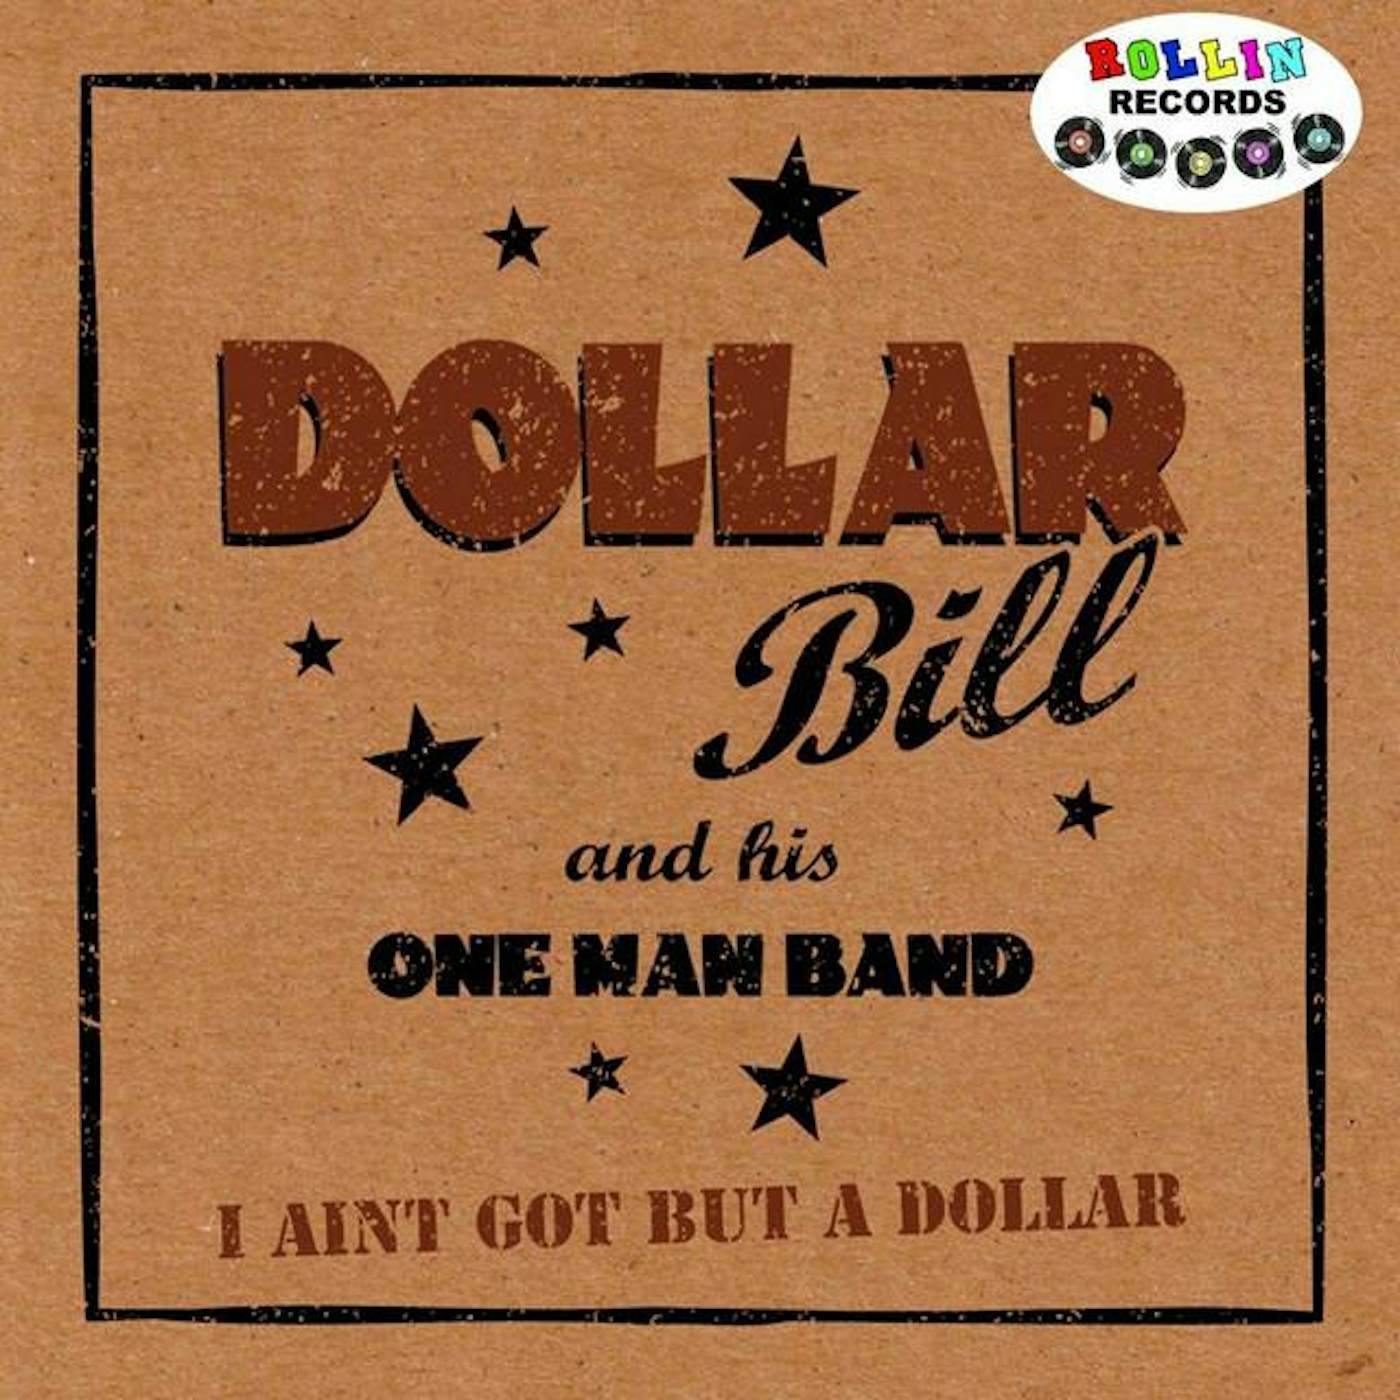 Dollar Bill and His One Mand Band